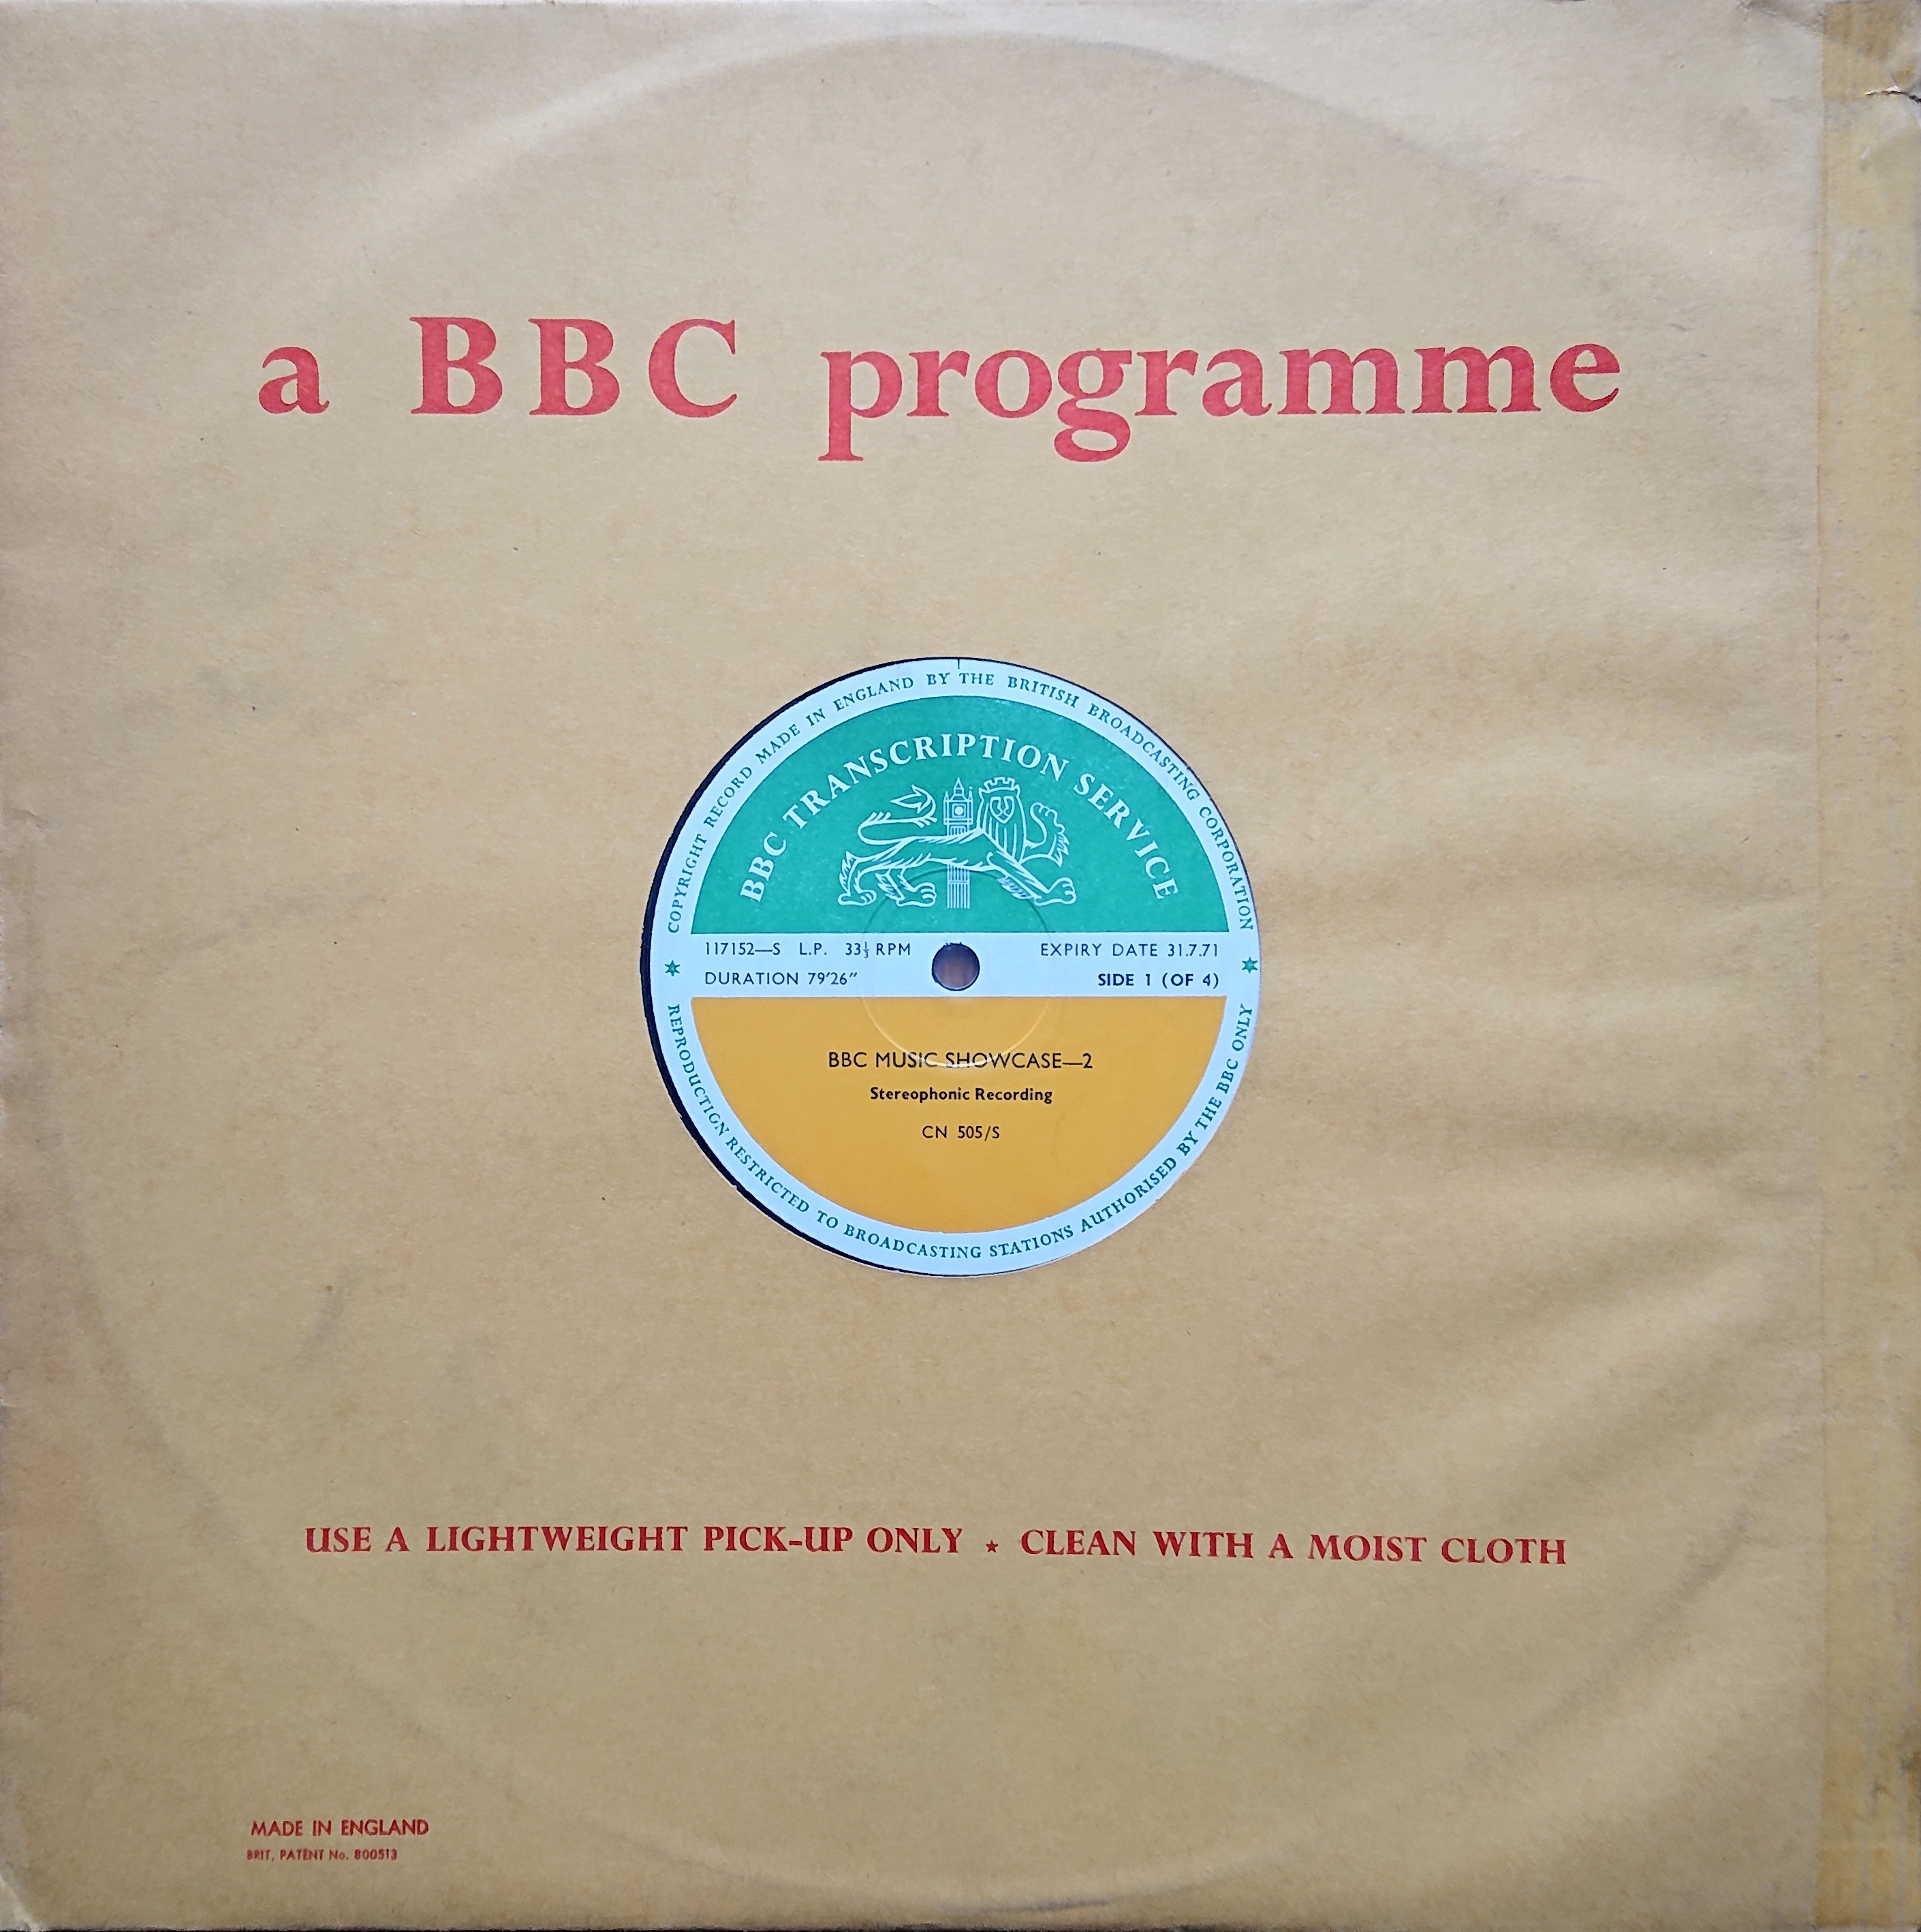 Picture of CN 505 S 03 BBC music showcase - 2 (Sides 1 & 3) by artist Various from the BBC albums - Records and Tapes library